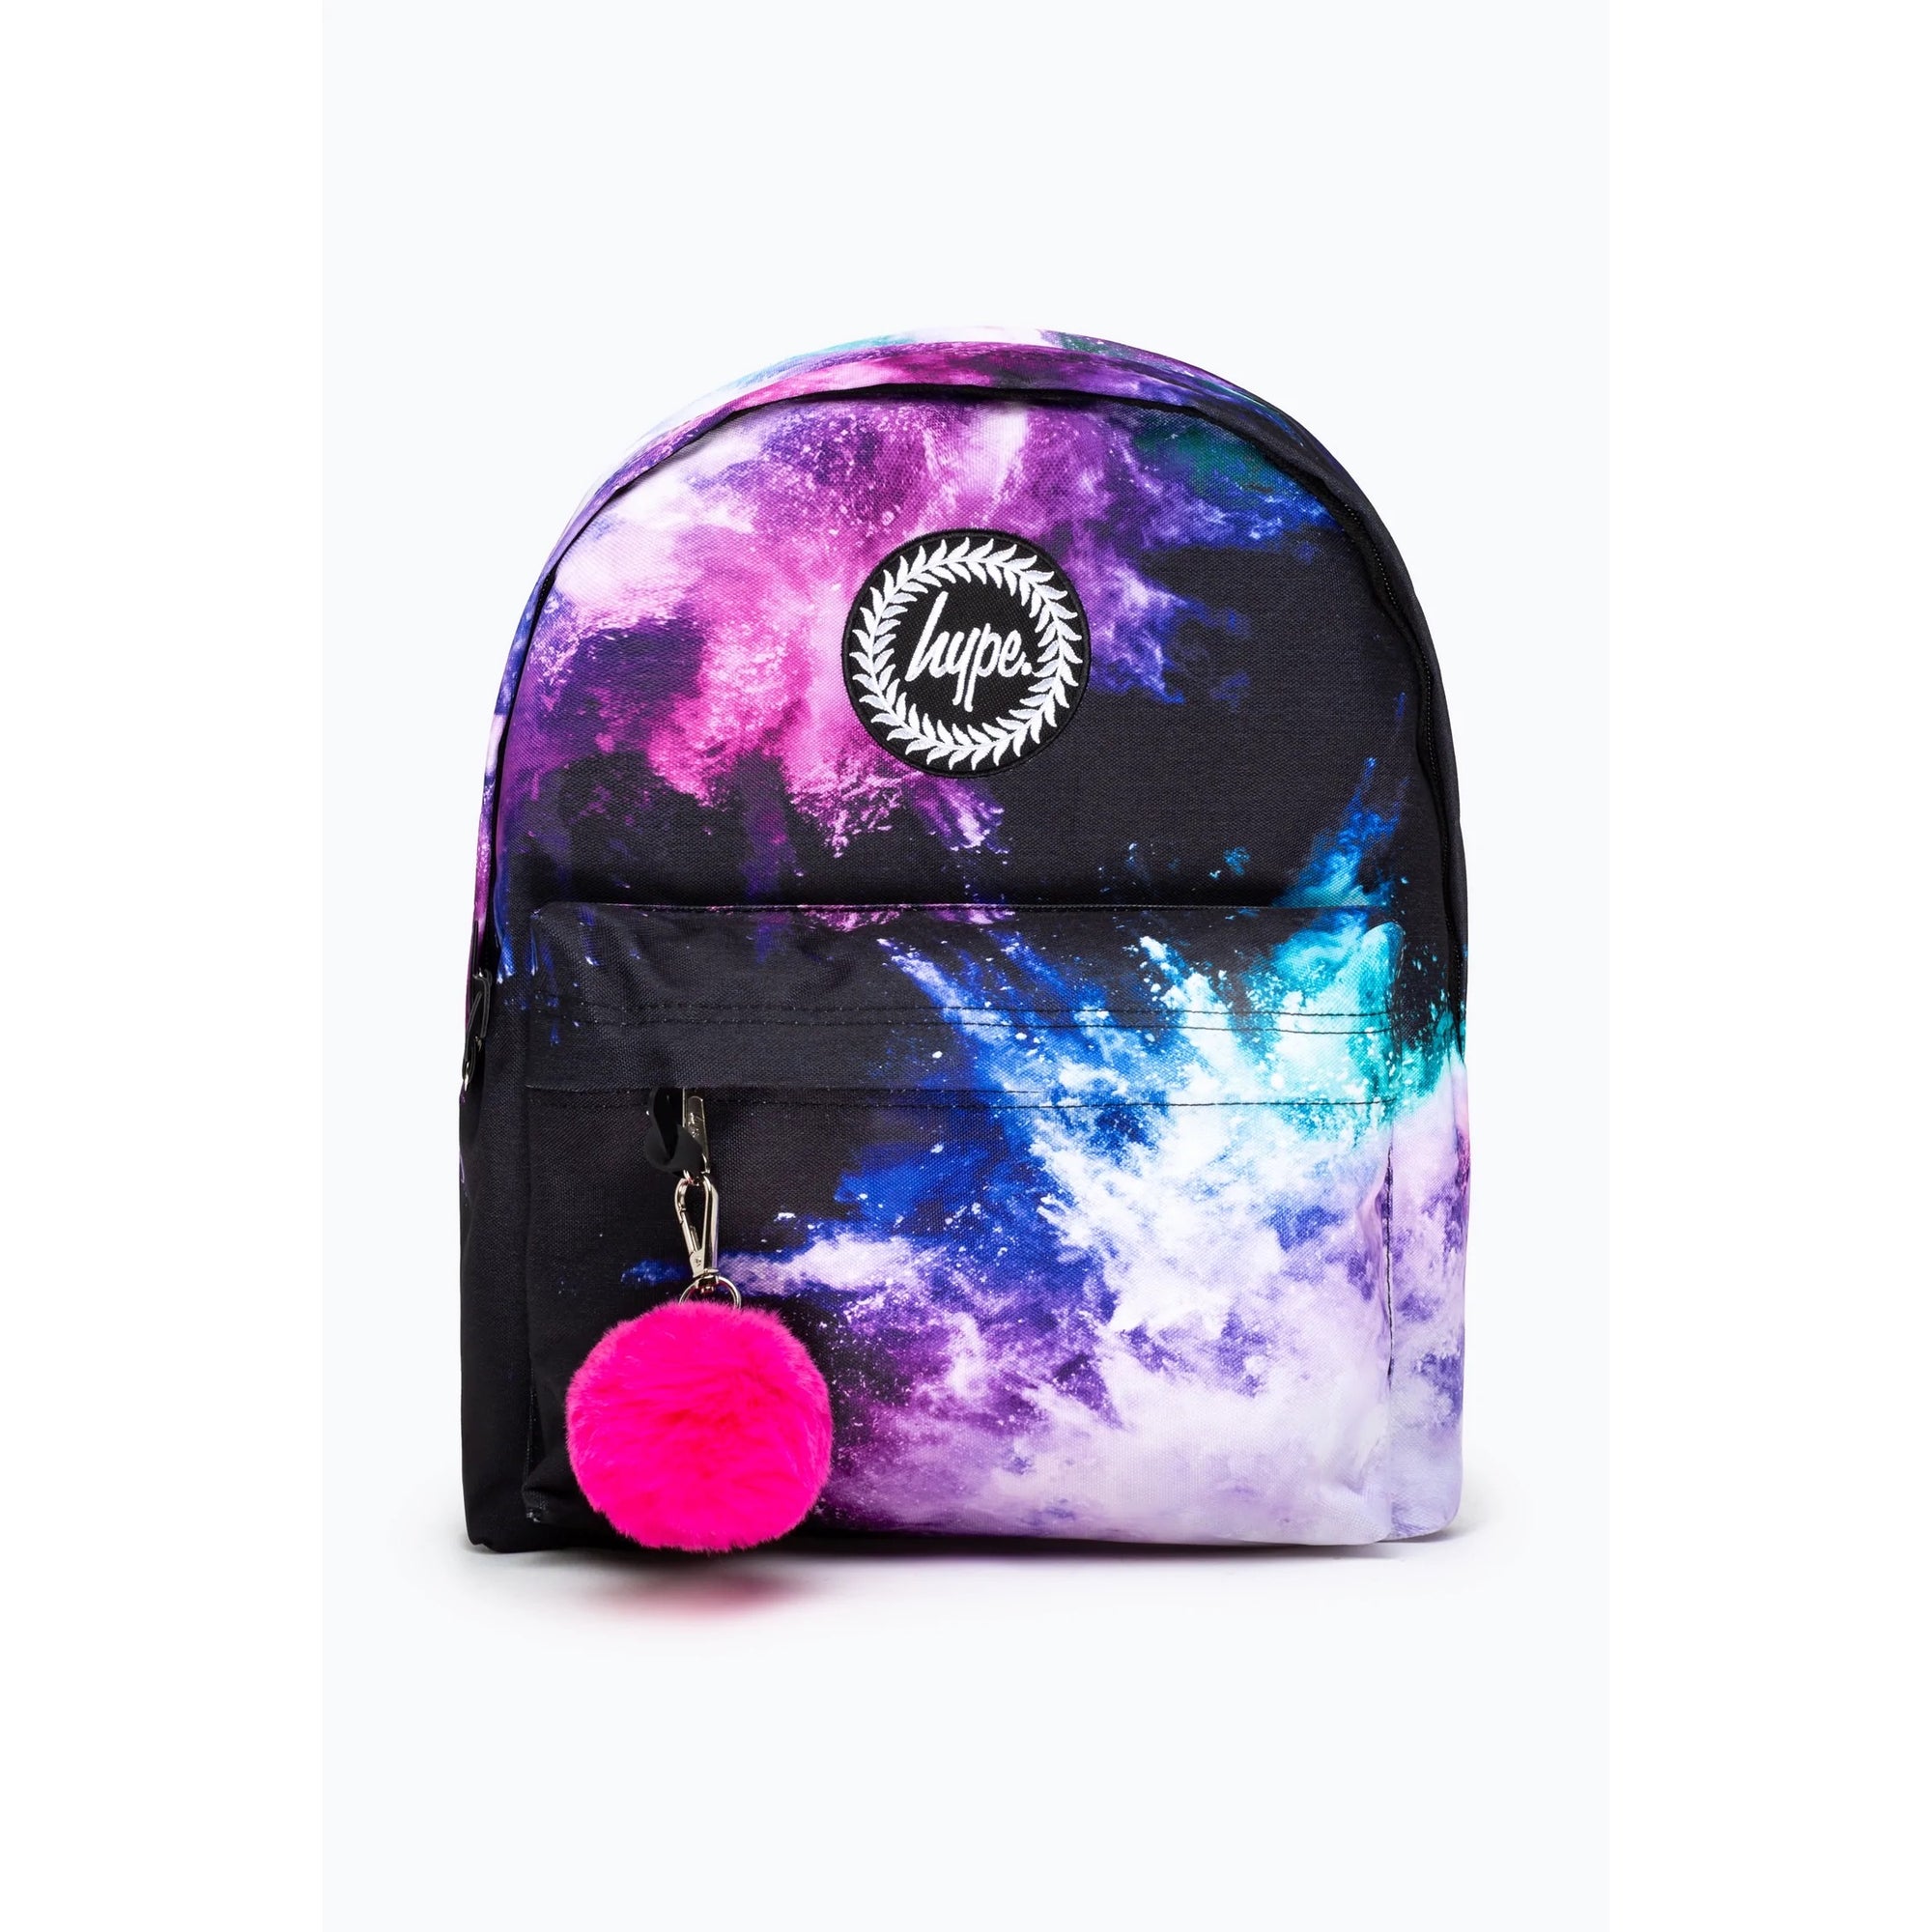 Hype Purple Teal Chalk Dust Backpack Twlg727 Accessories ONE SIZE / Multi